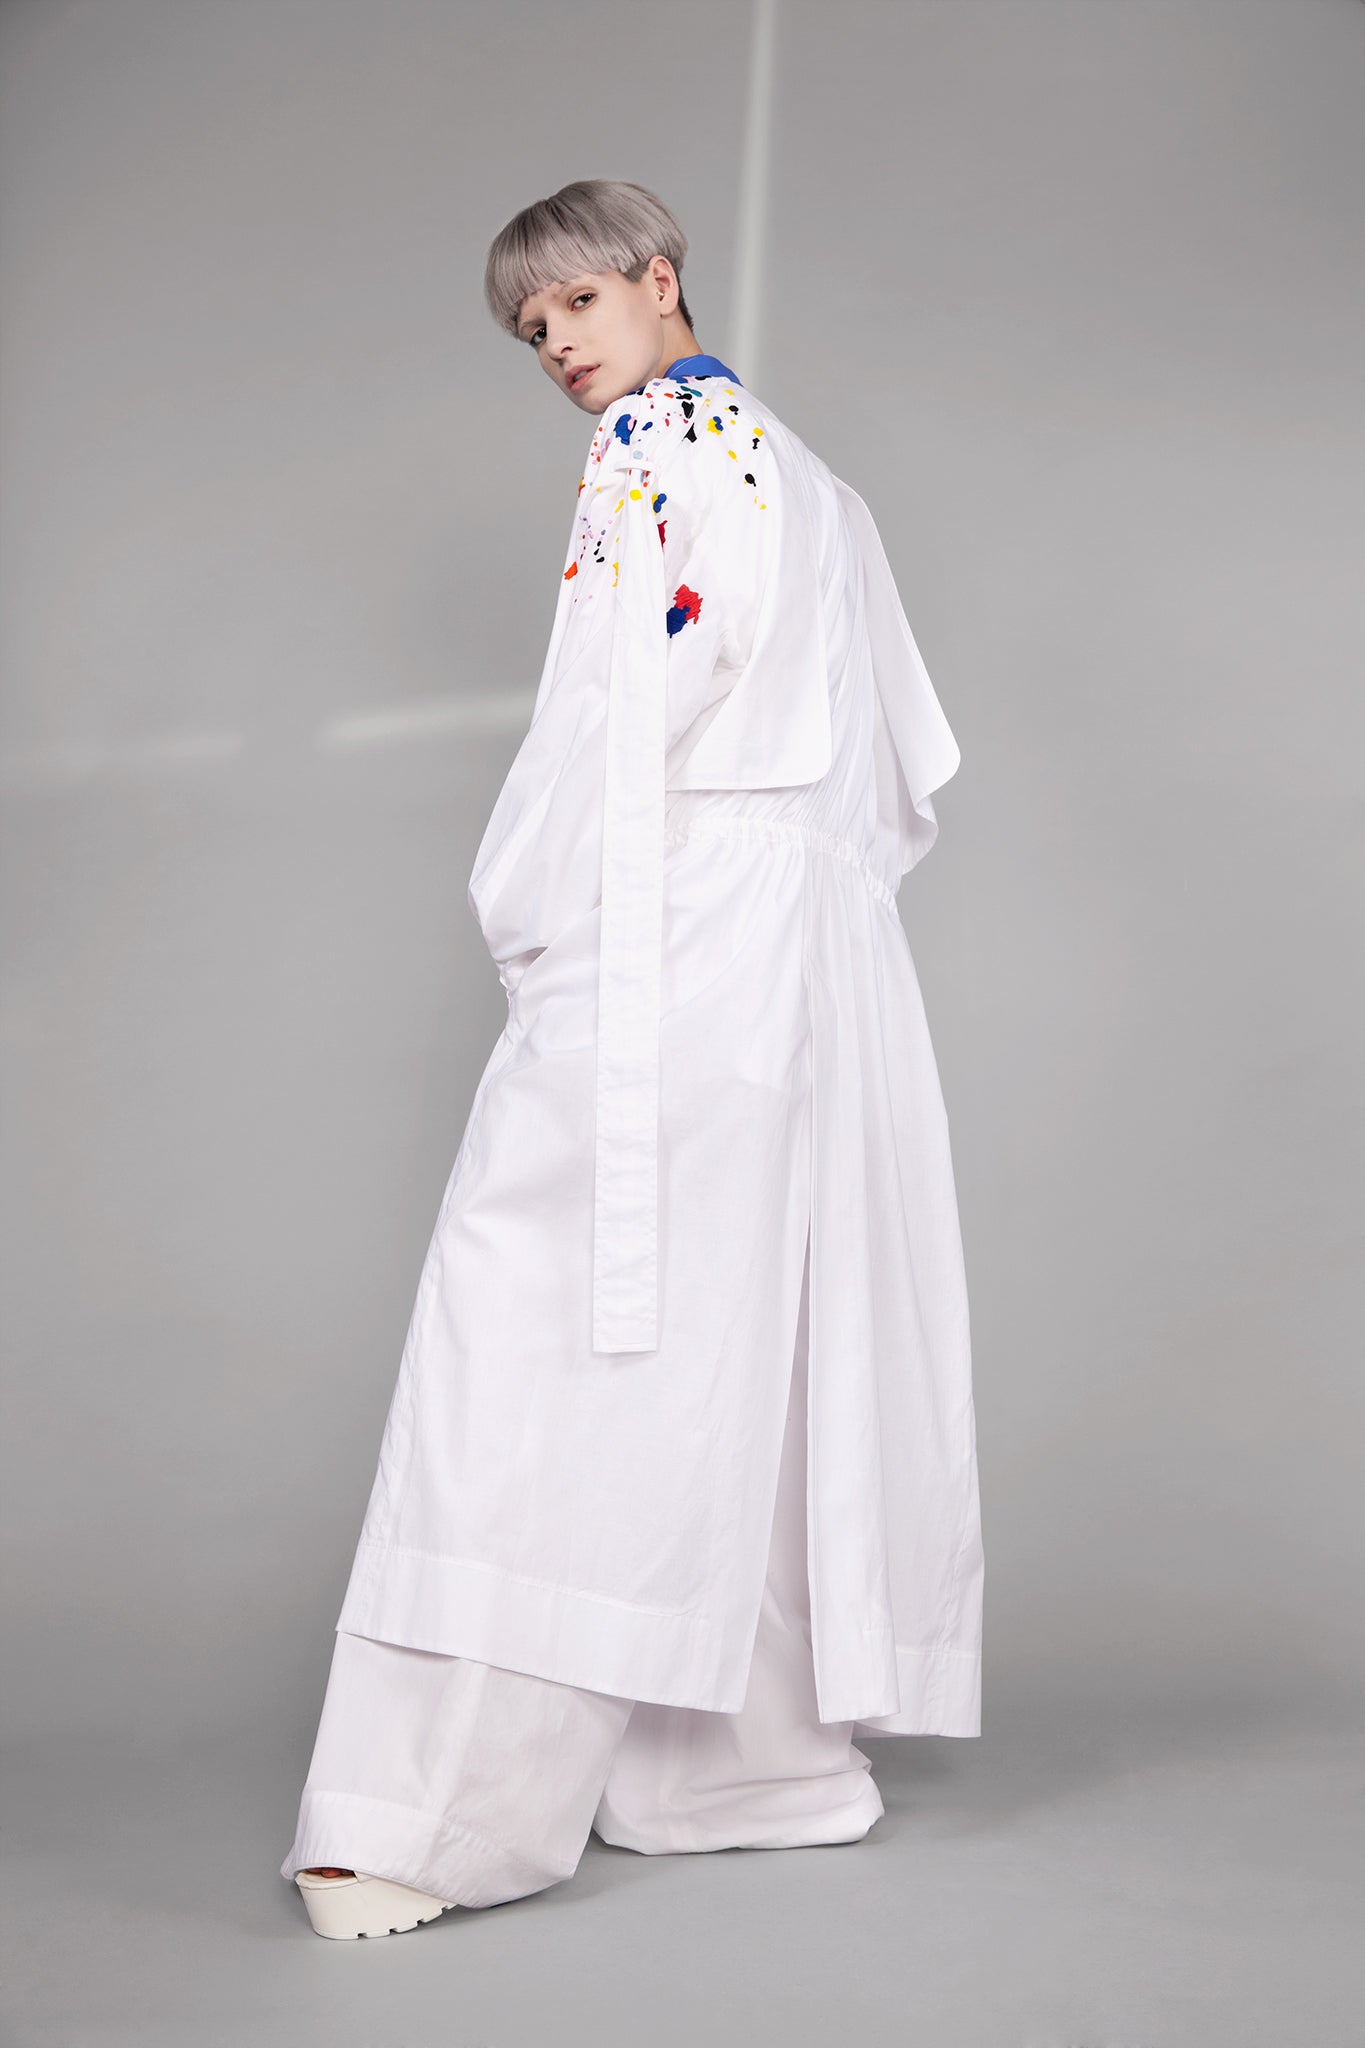 Colourful embroidered paint splashes on crisp white cotton 'Helios' trench coat from emerging brand CIMONE. Embellishments and overall look at echoed by Oscar de la Renta one year later in SS18 - be ahead of the trends and support new brands! 